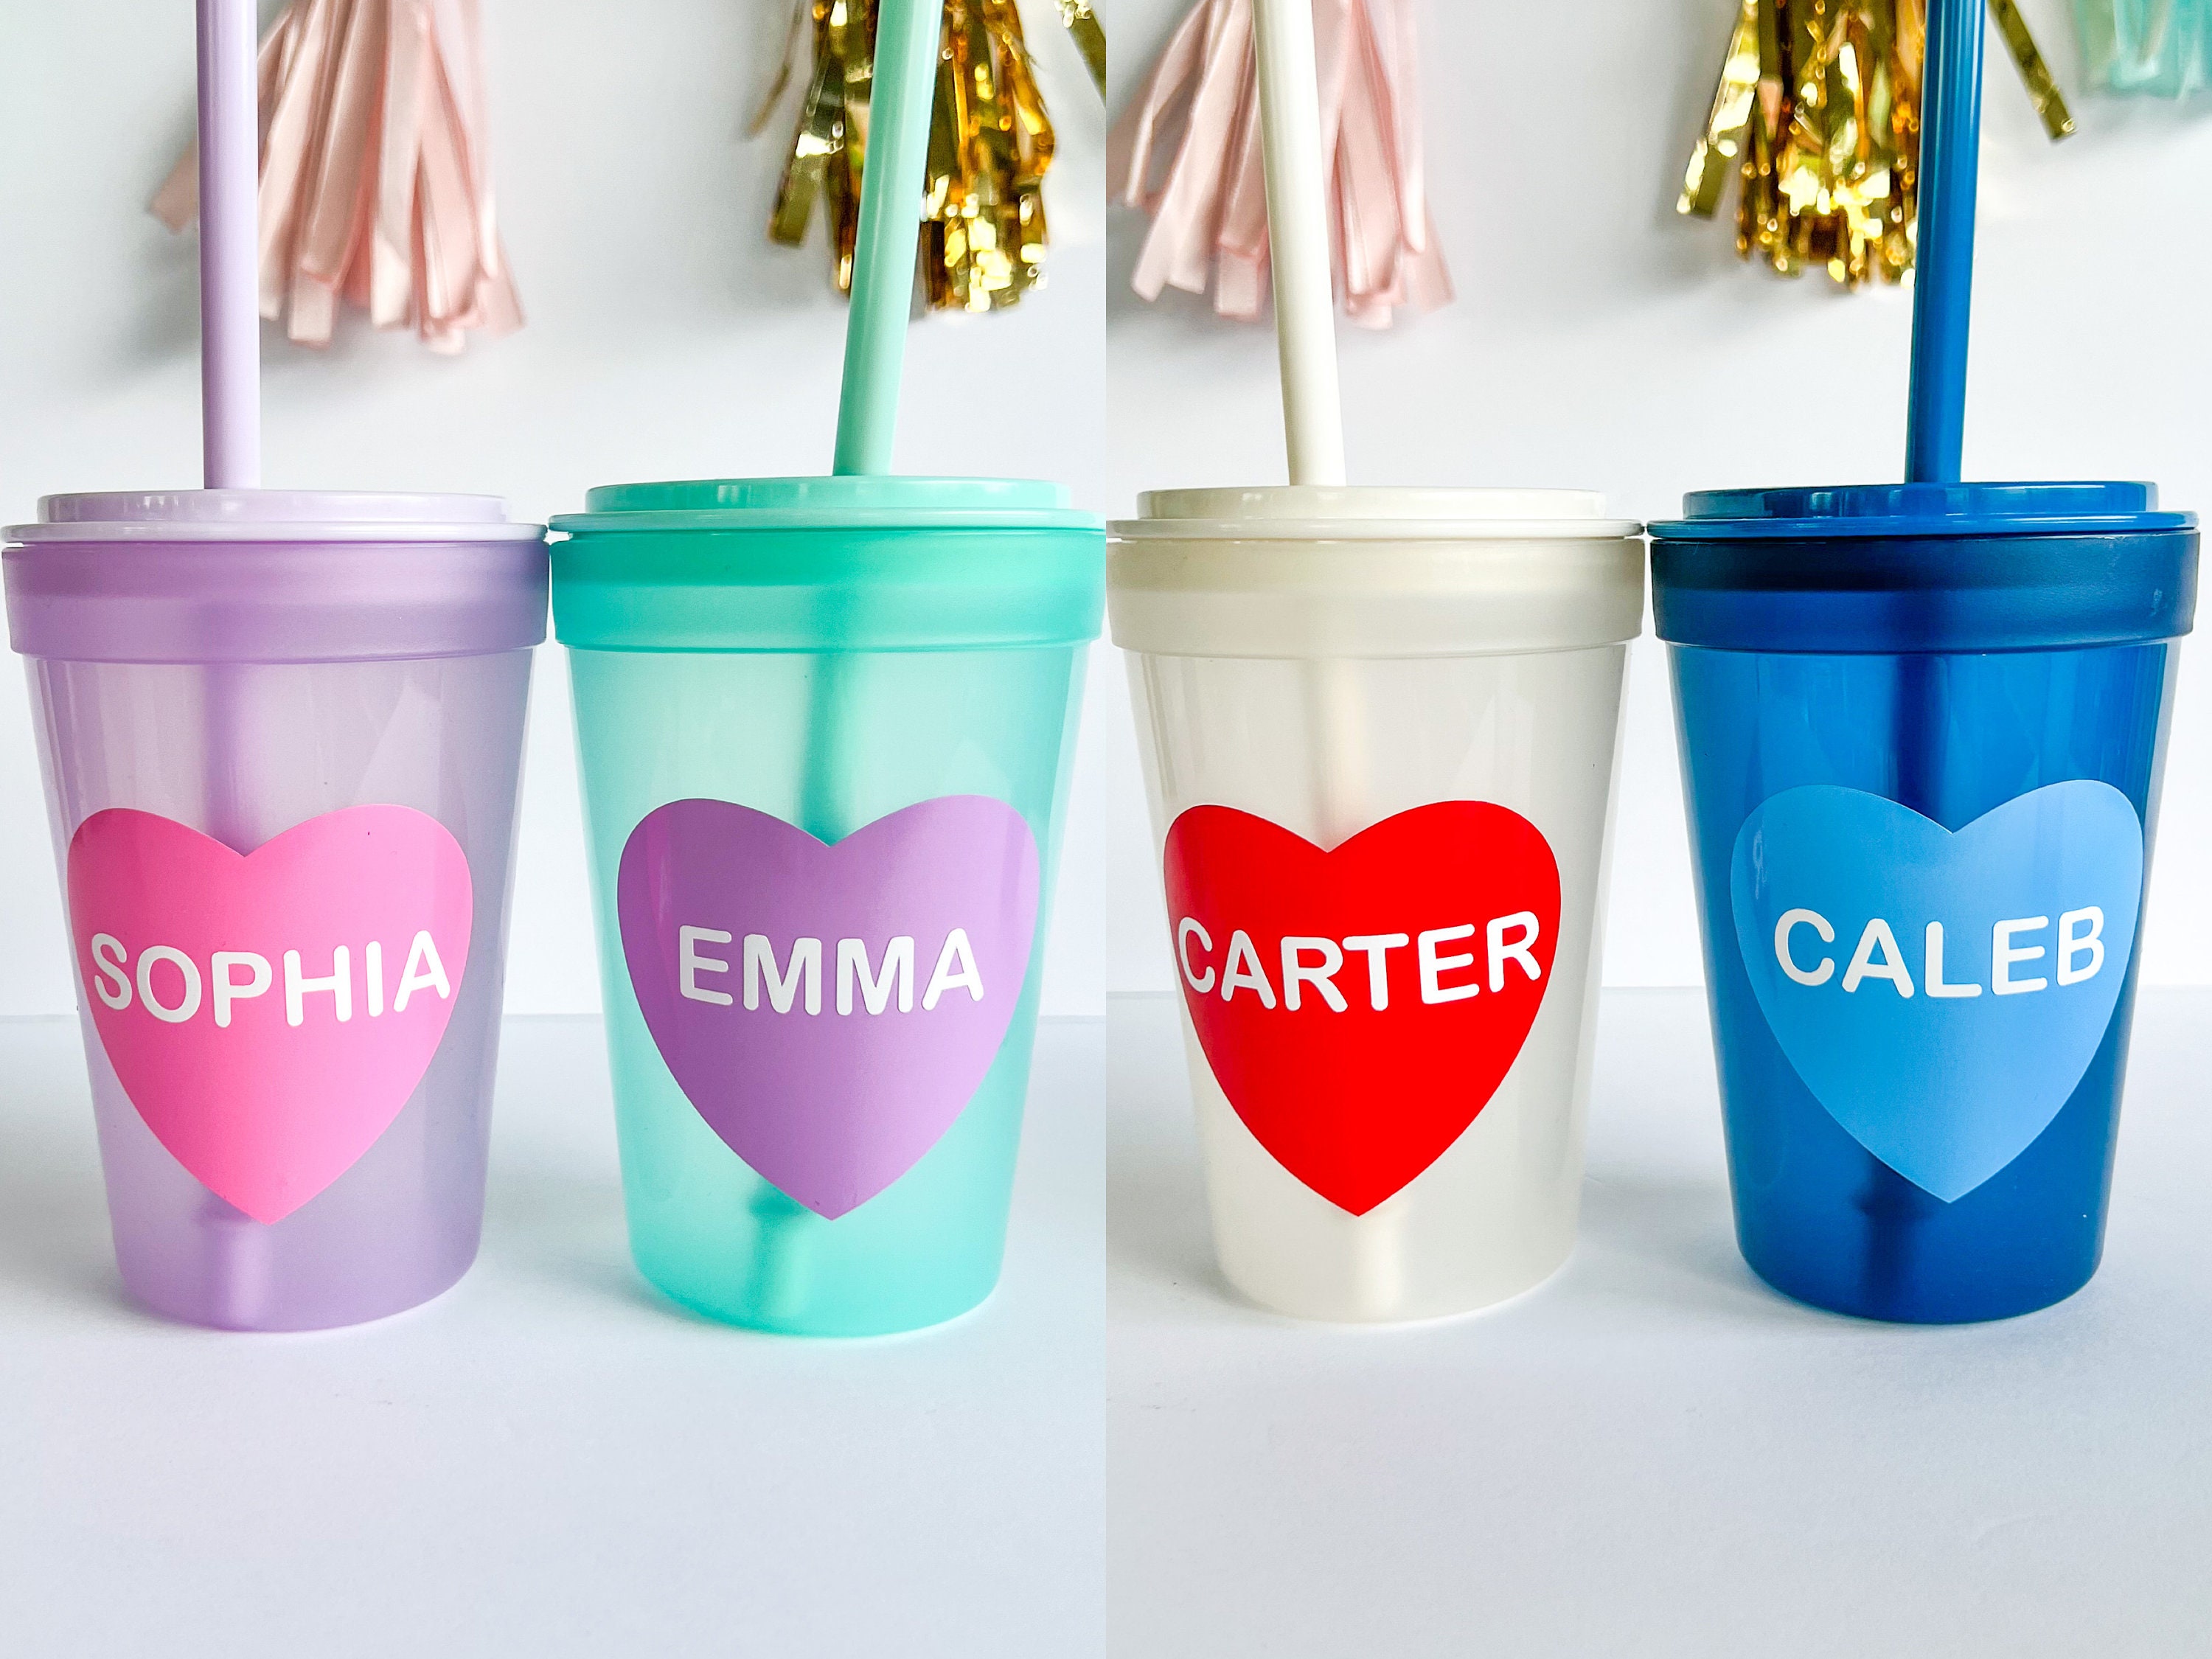 Taylor Swift Album Themed Stanley Sized Straw Charms 3D Printed 